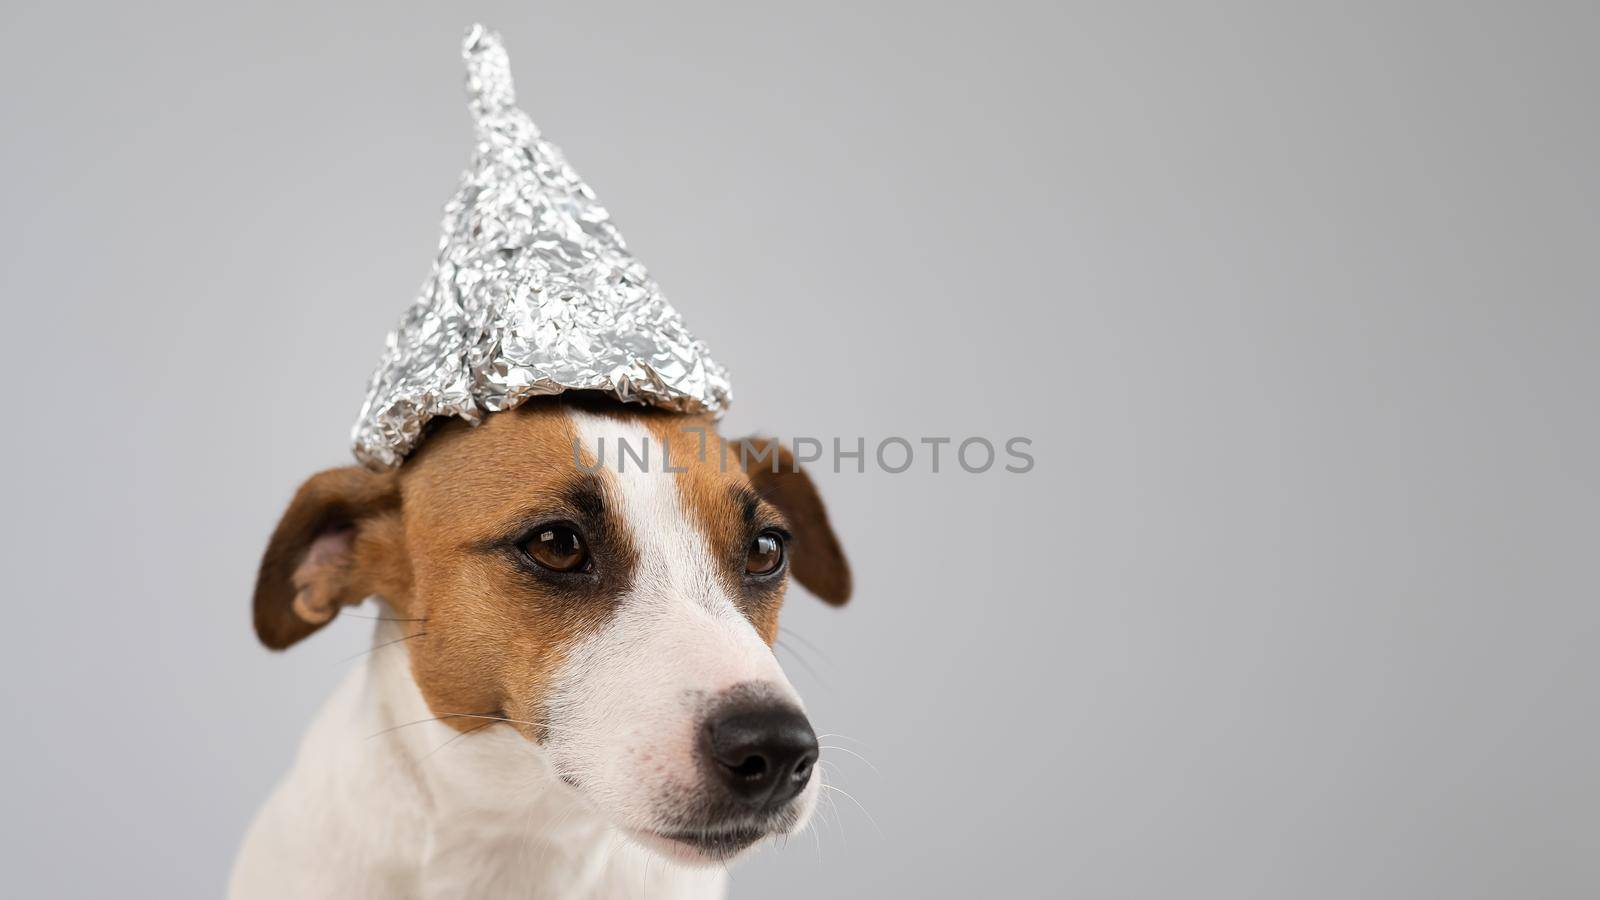 Portrait of a Jack Russell Terrier dog in a tinfoil hat on a white background